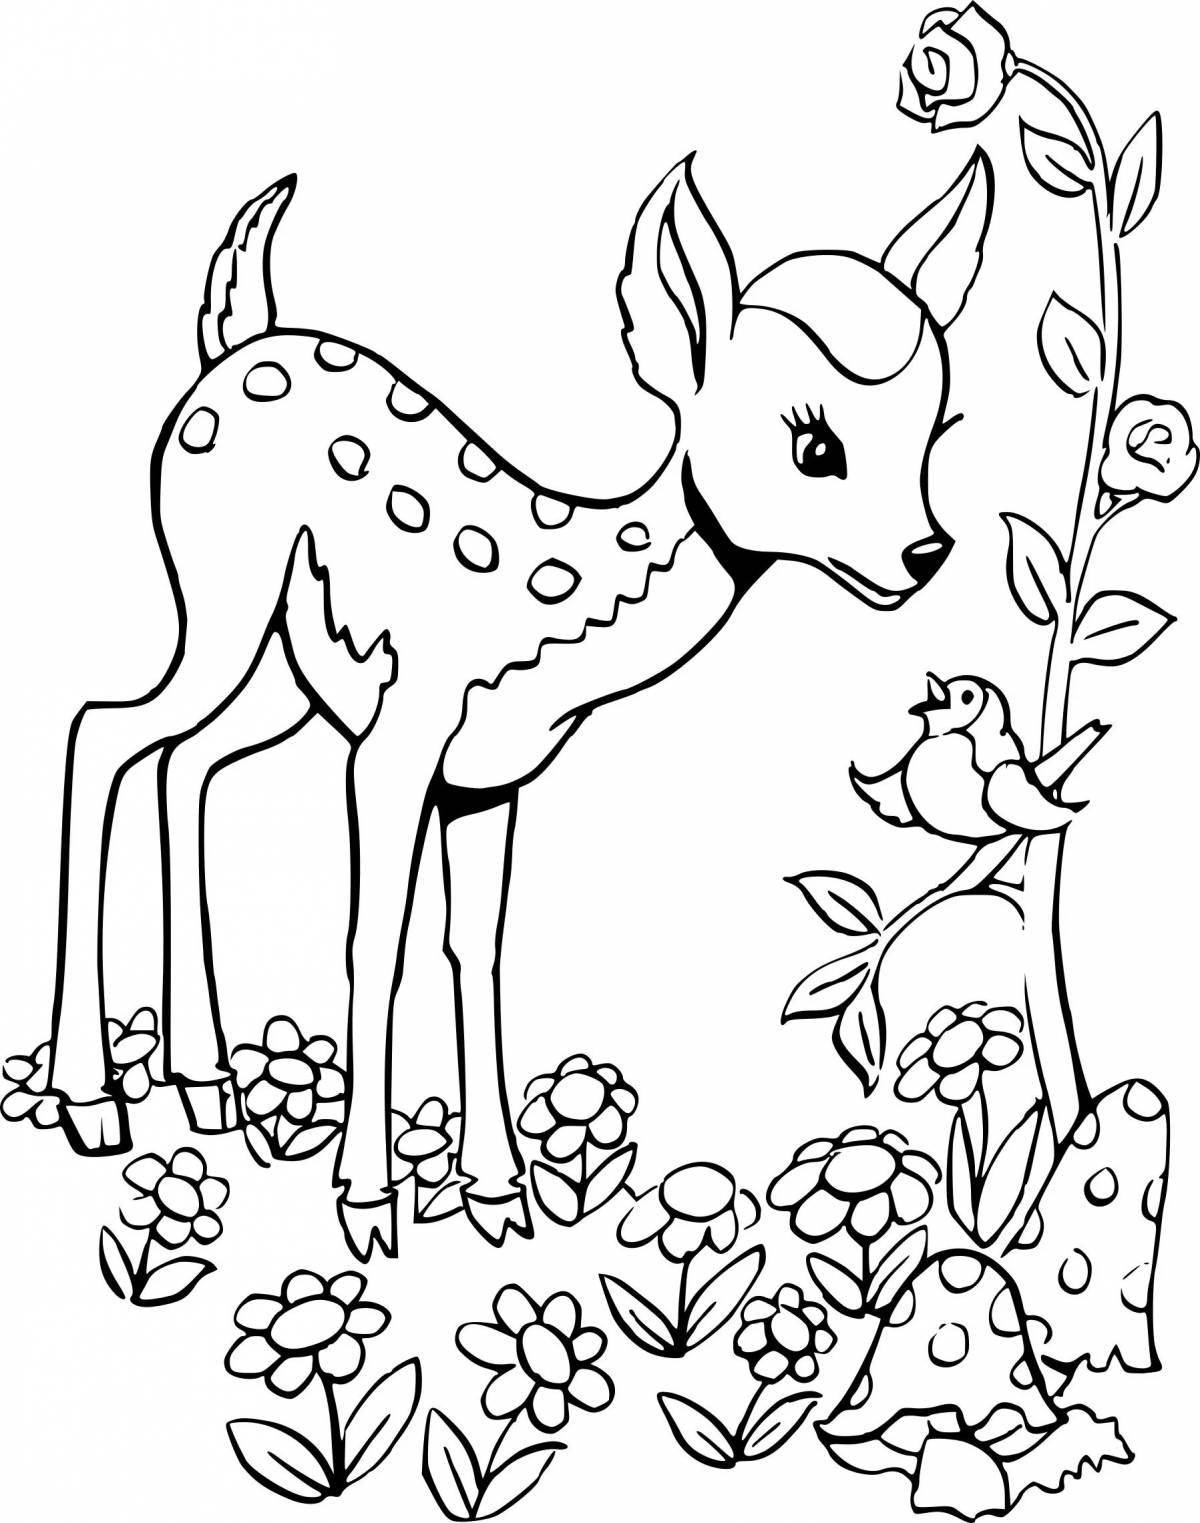 Colorful animal coloring for kids